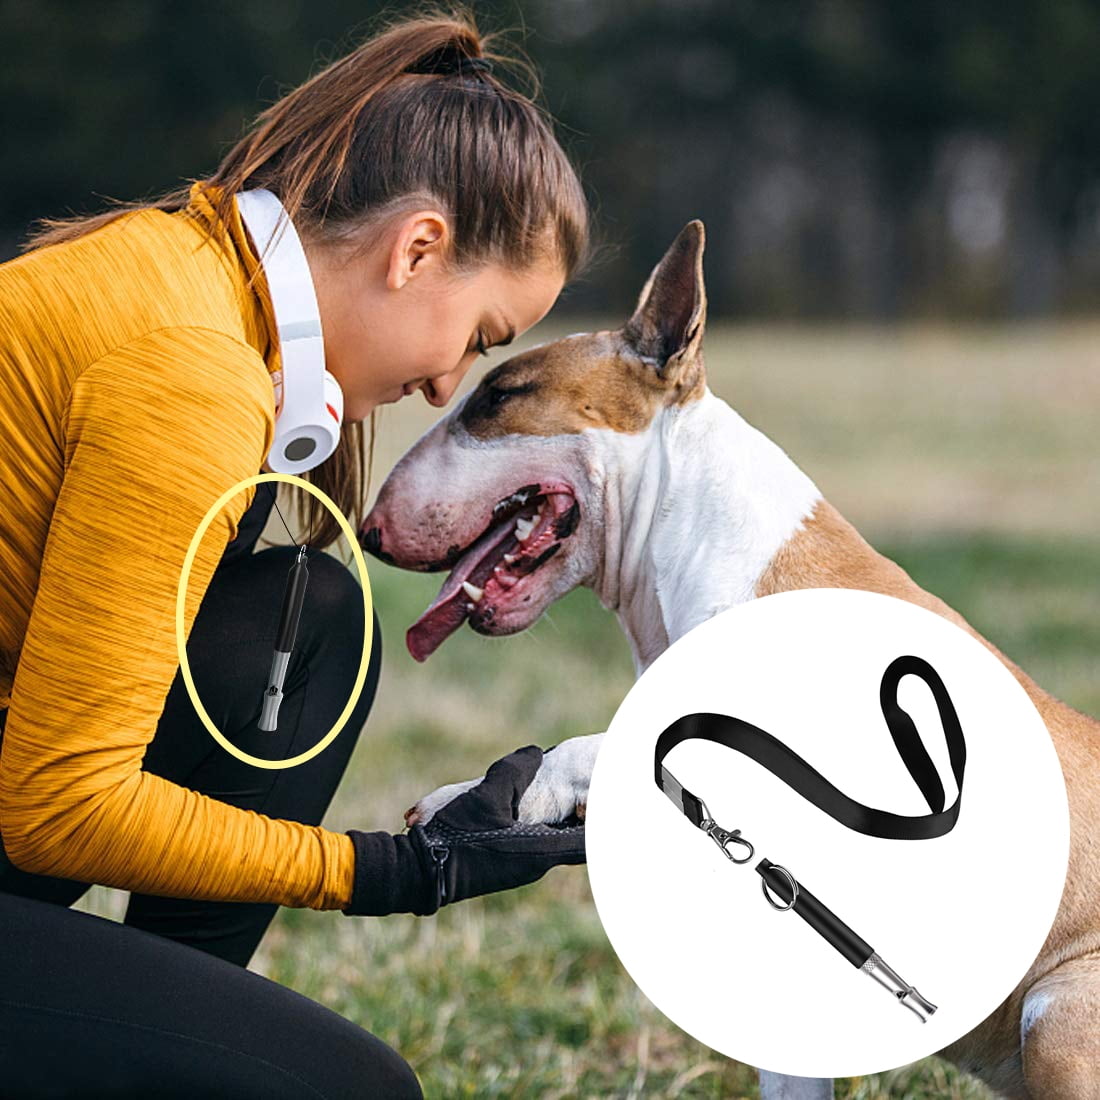 Silent Dog Bark Control Tool for Training Pets with Lanyard Strap Professional Ultrasonic High Pitch Adjustable Volume Dog Train Whistle to Stop Barking Black PAWABOO Dog Training Whistle 5 Pack 